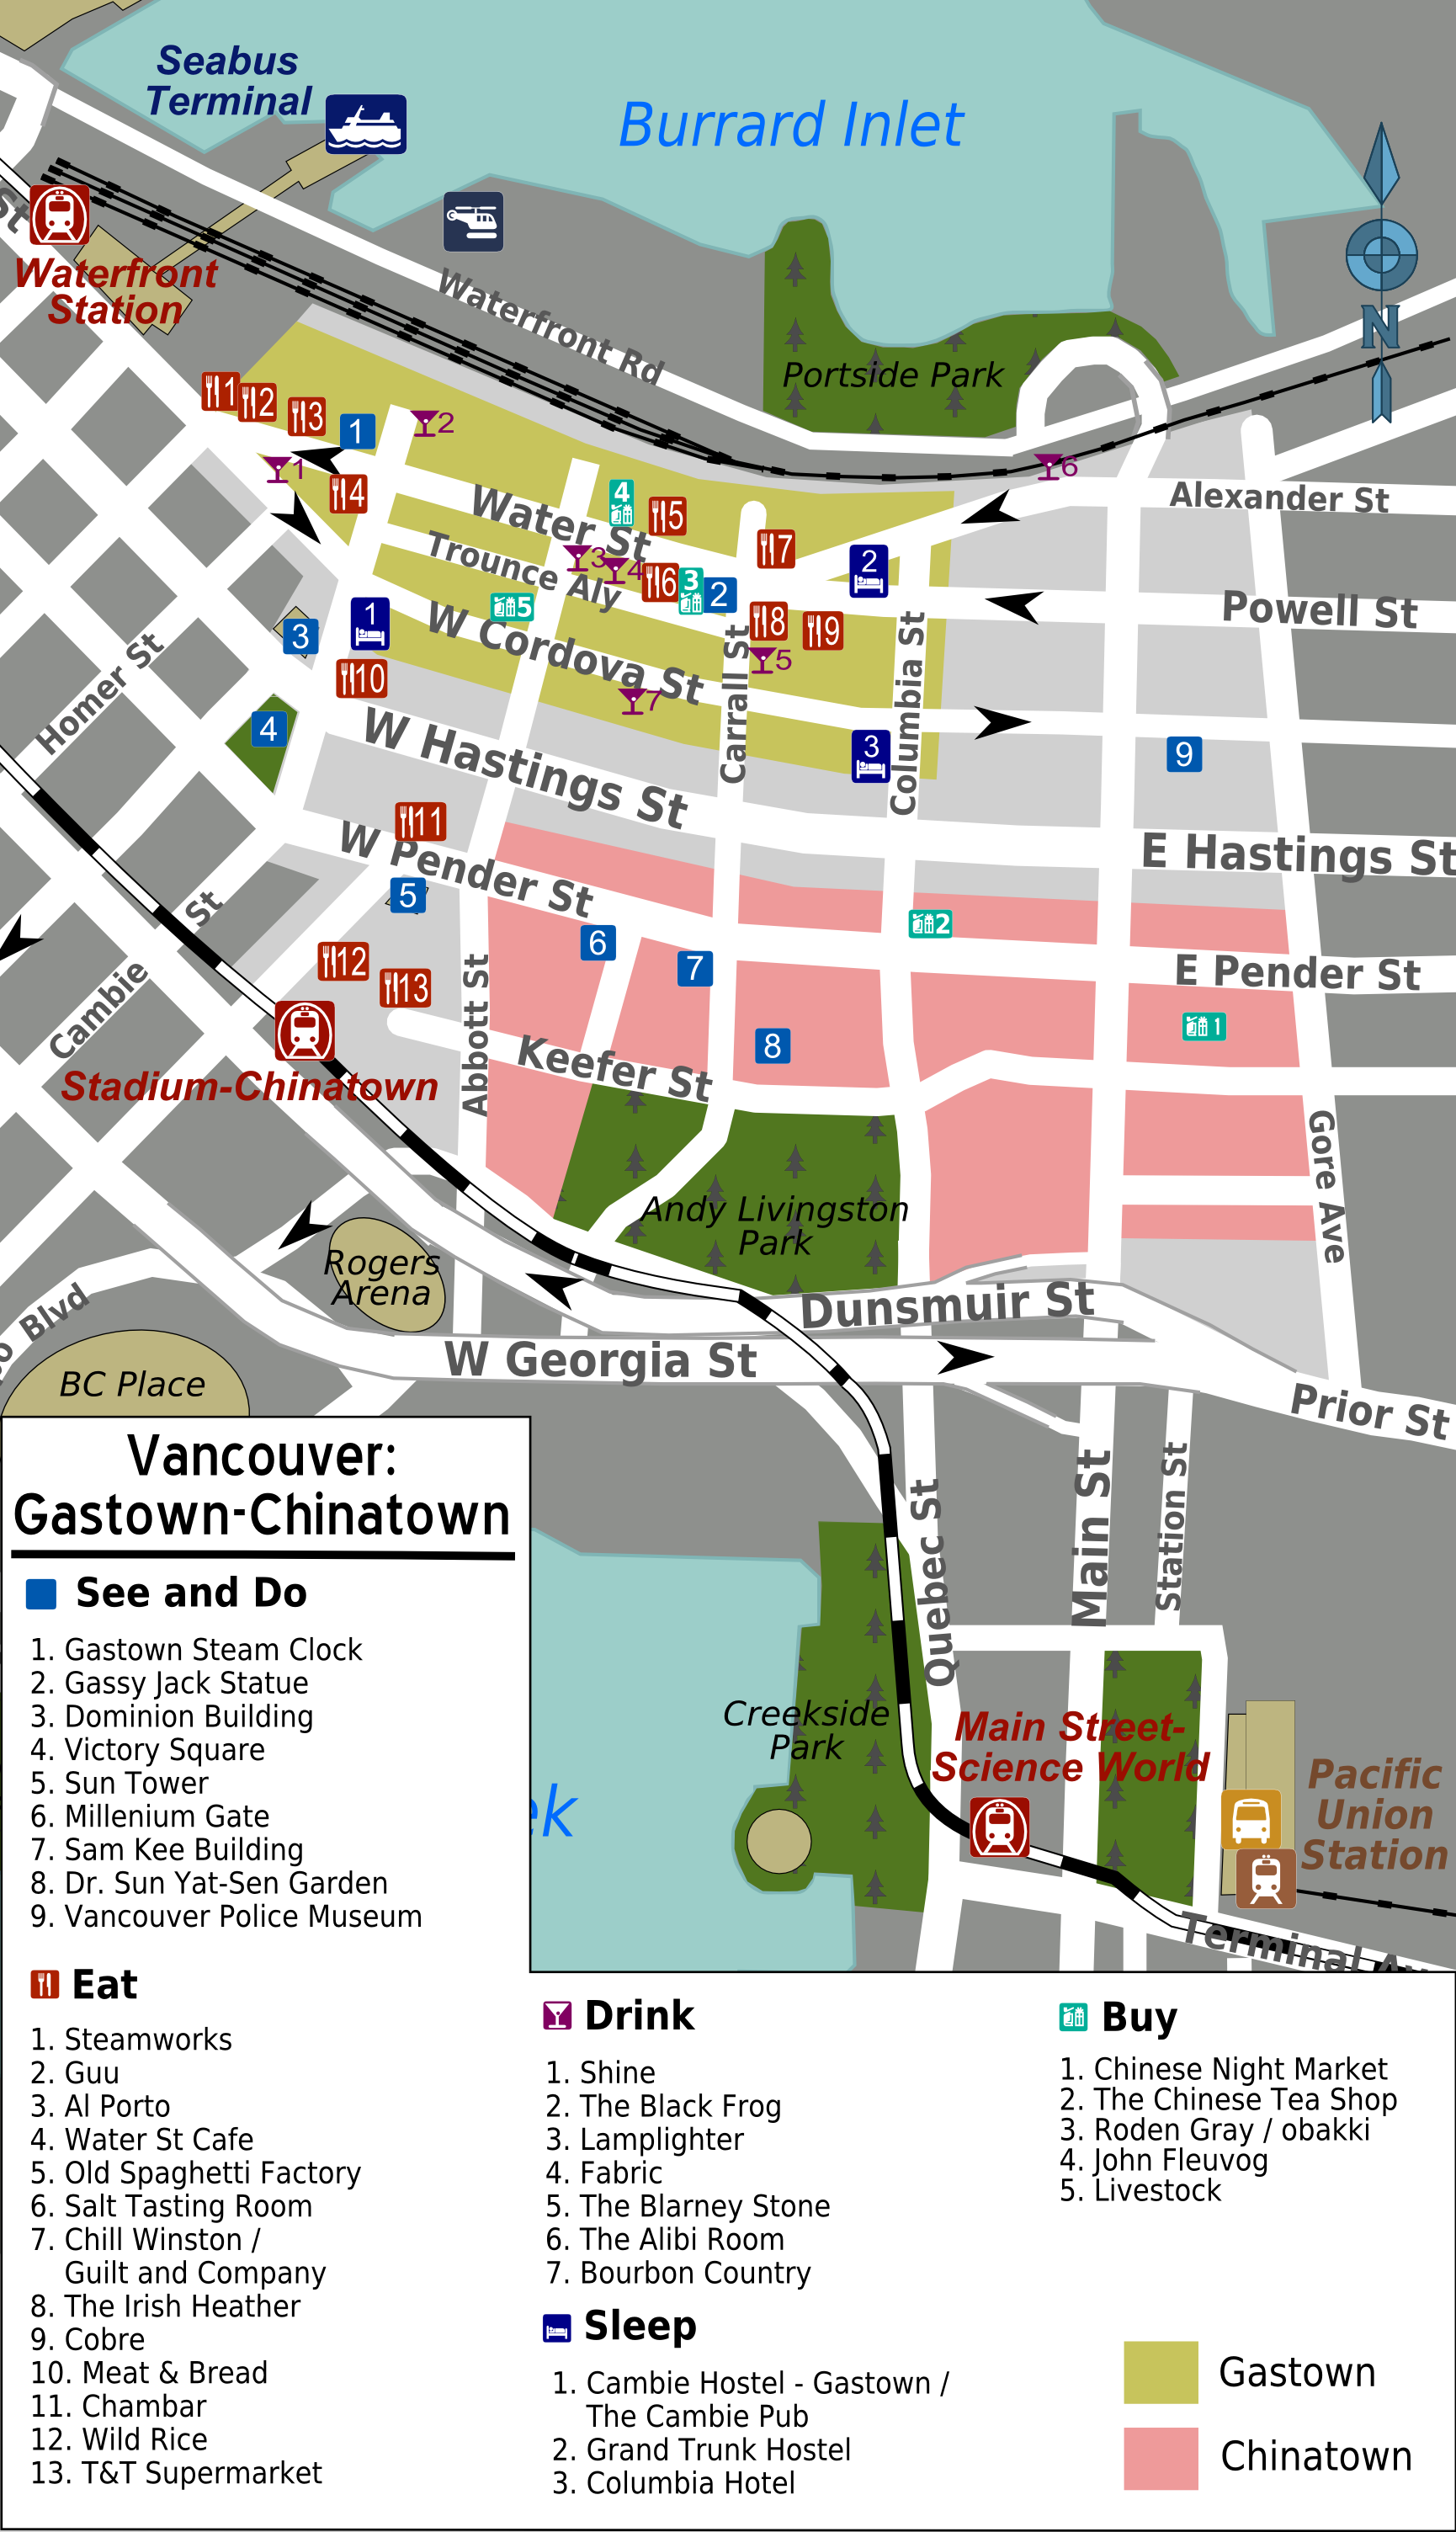 Gastown Map - source: Wikimedia commons